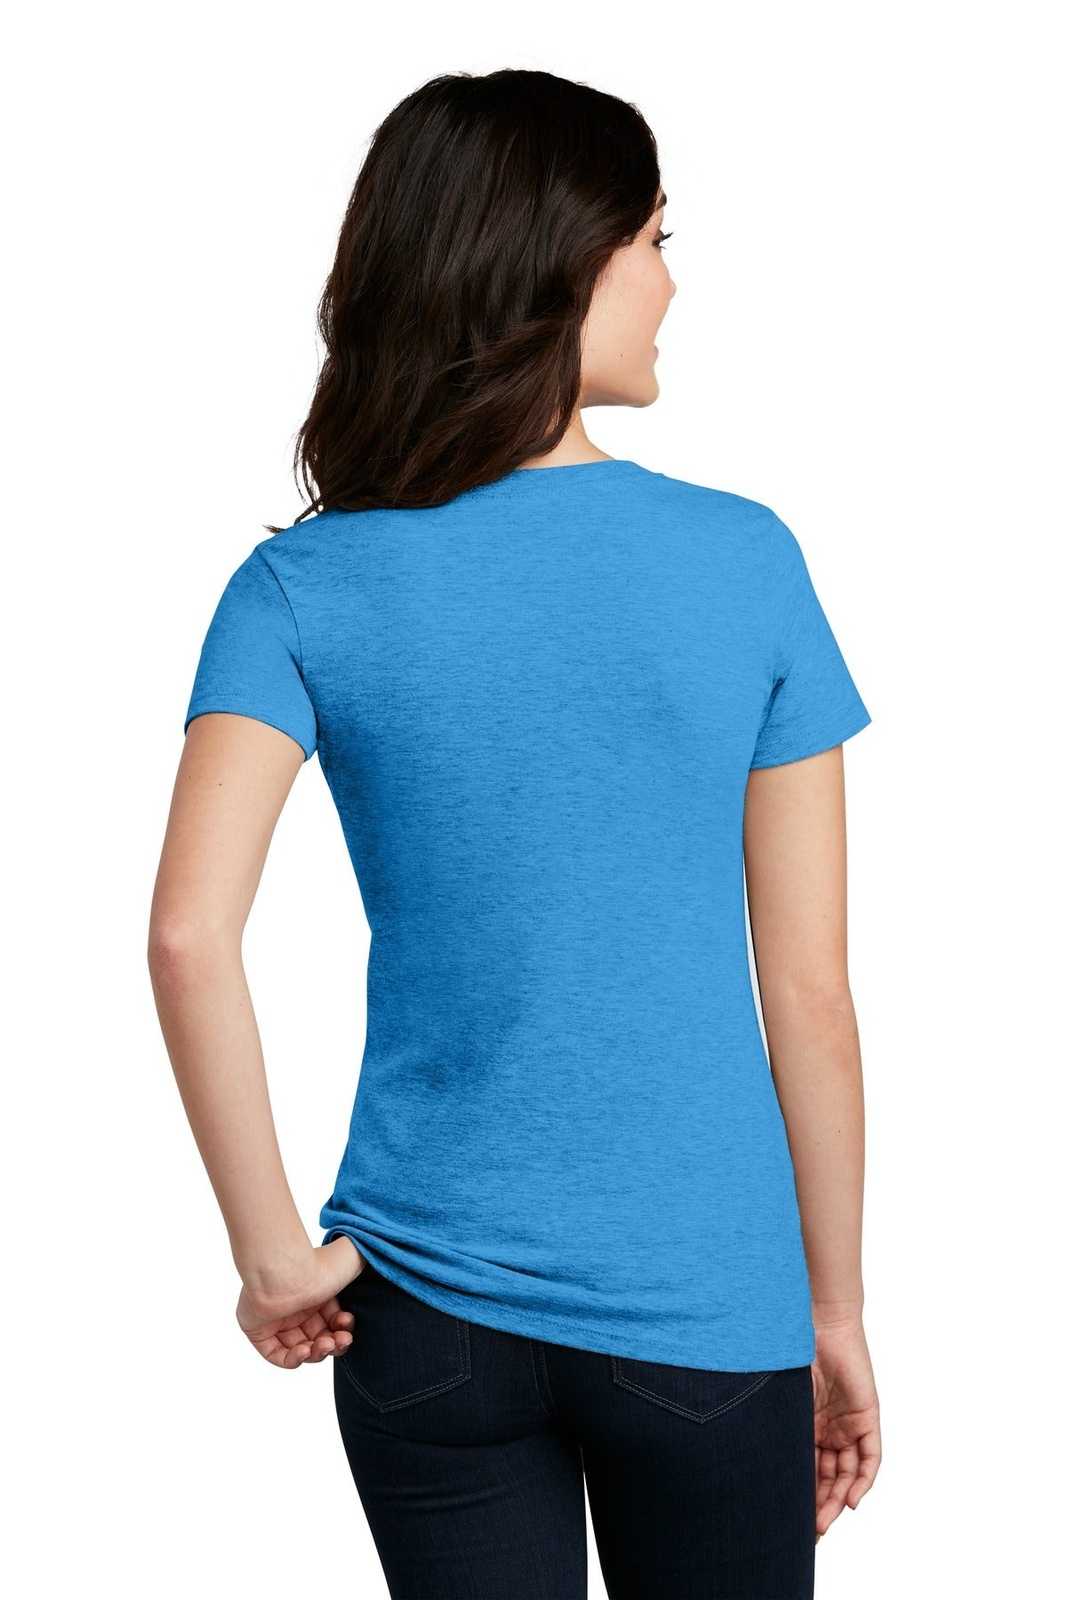 District DM1190L Women's Perfect Blend V-Neck Tee - Heathered Bright Turquoise - HIT a Double - 1